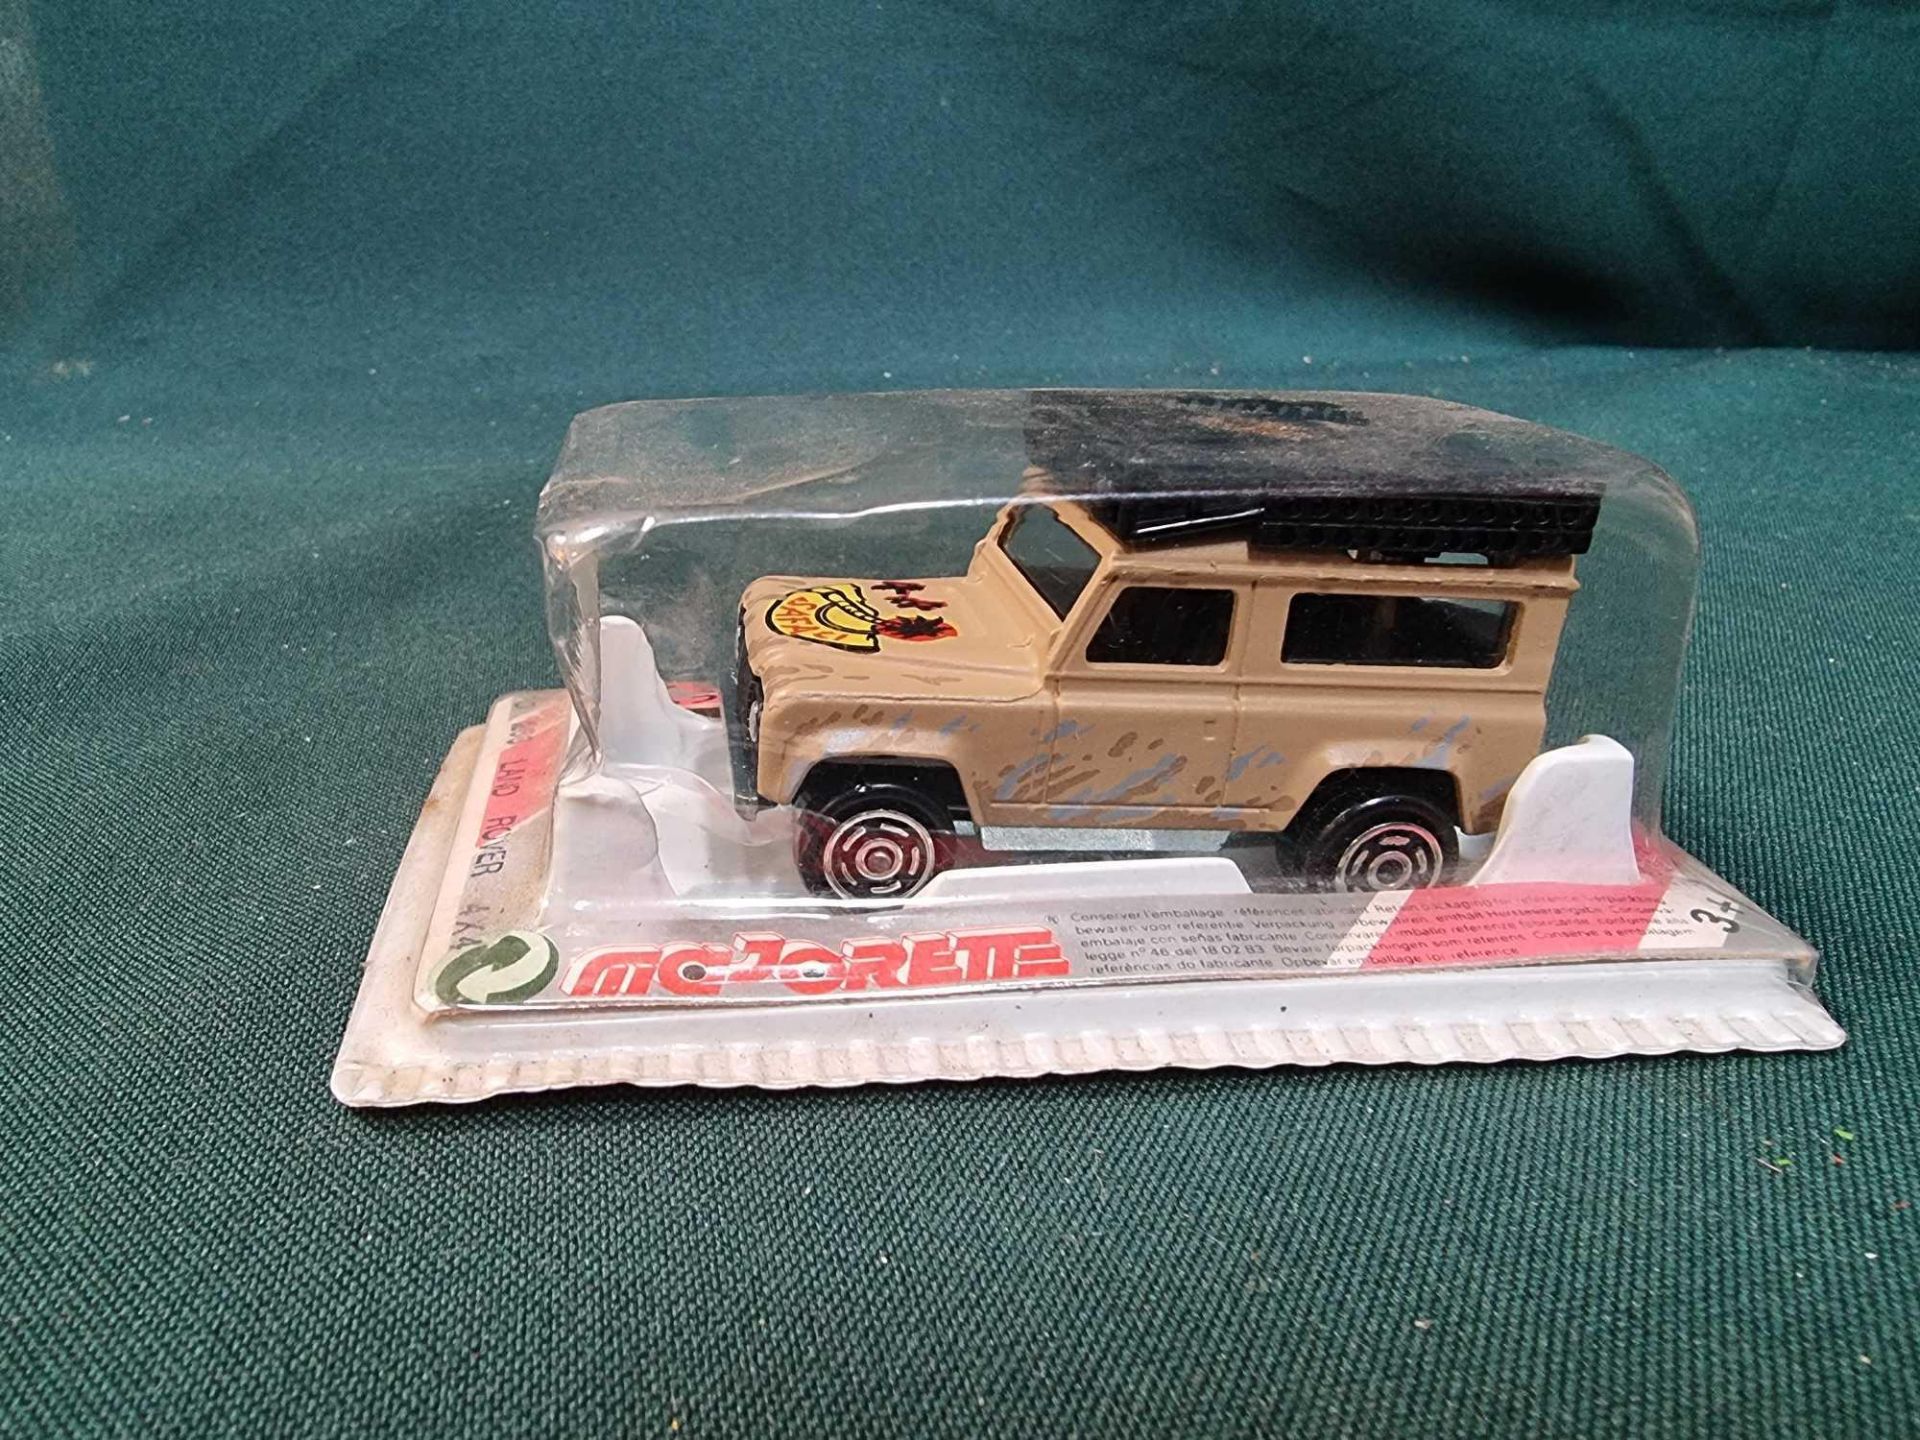 6 X Majorette Diecast Models In Bubble Card Comprising Of #233 Renault Express Van #266 Land - Image 6 of 7